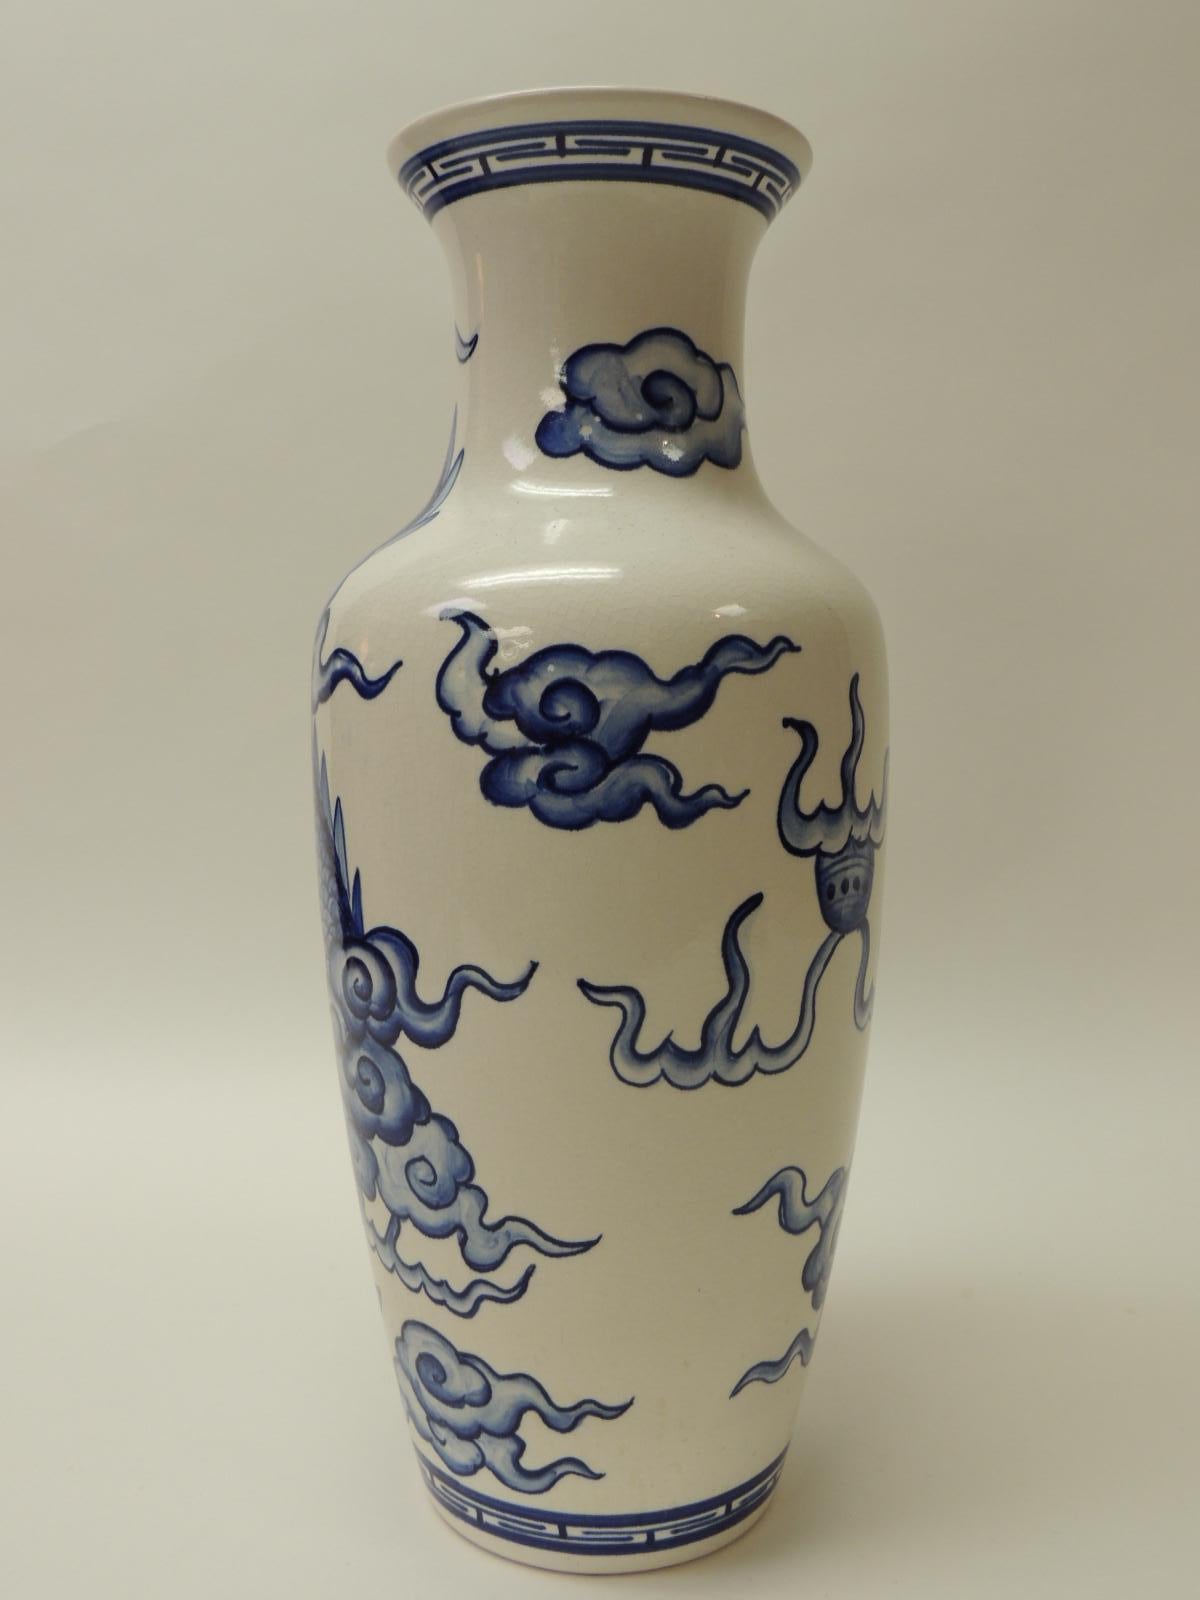 Vintage Blue and White Porcelain Asian Tall Vase (Chinesisch)